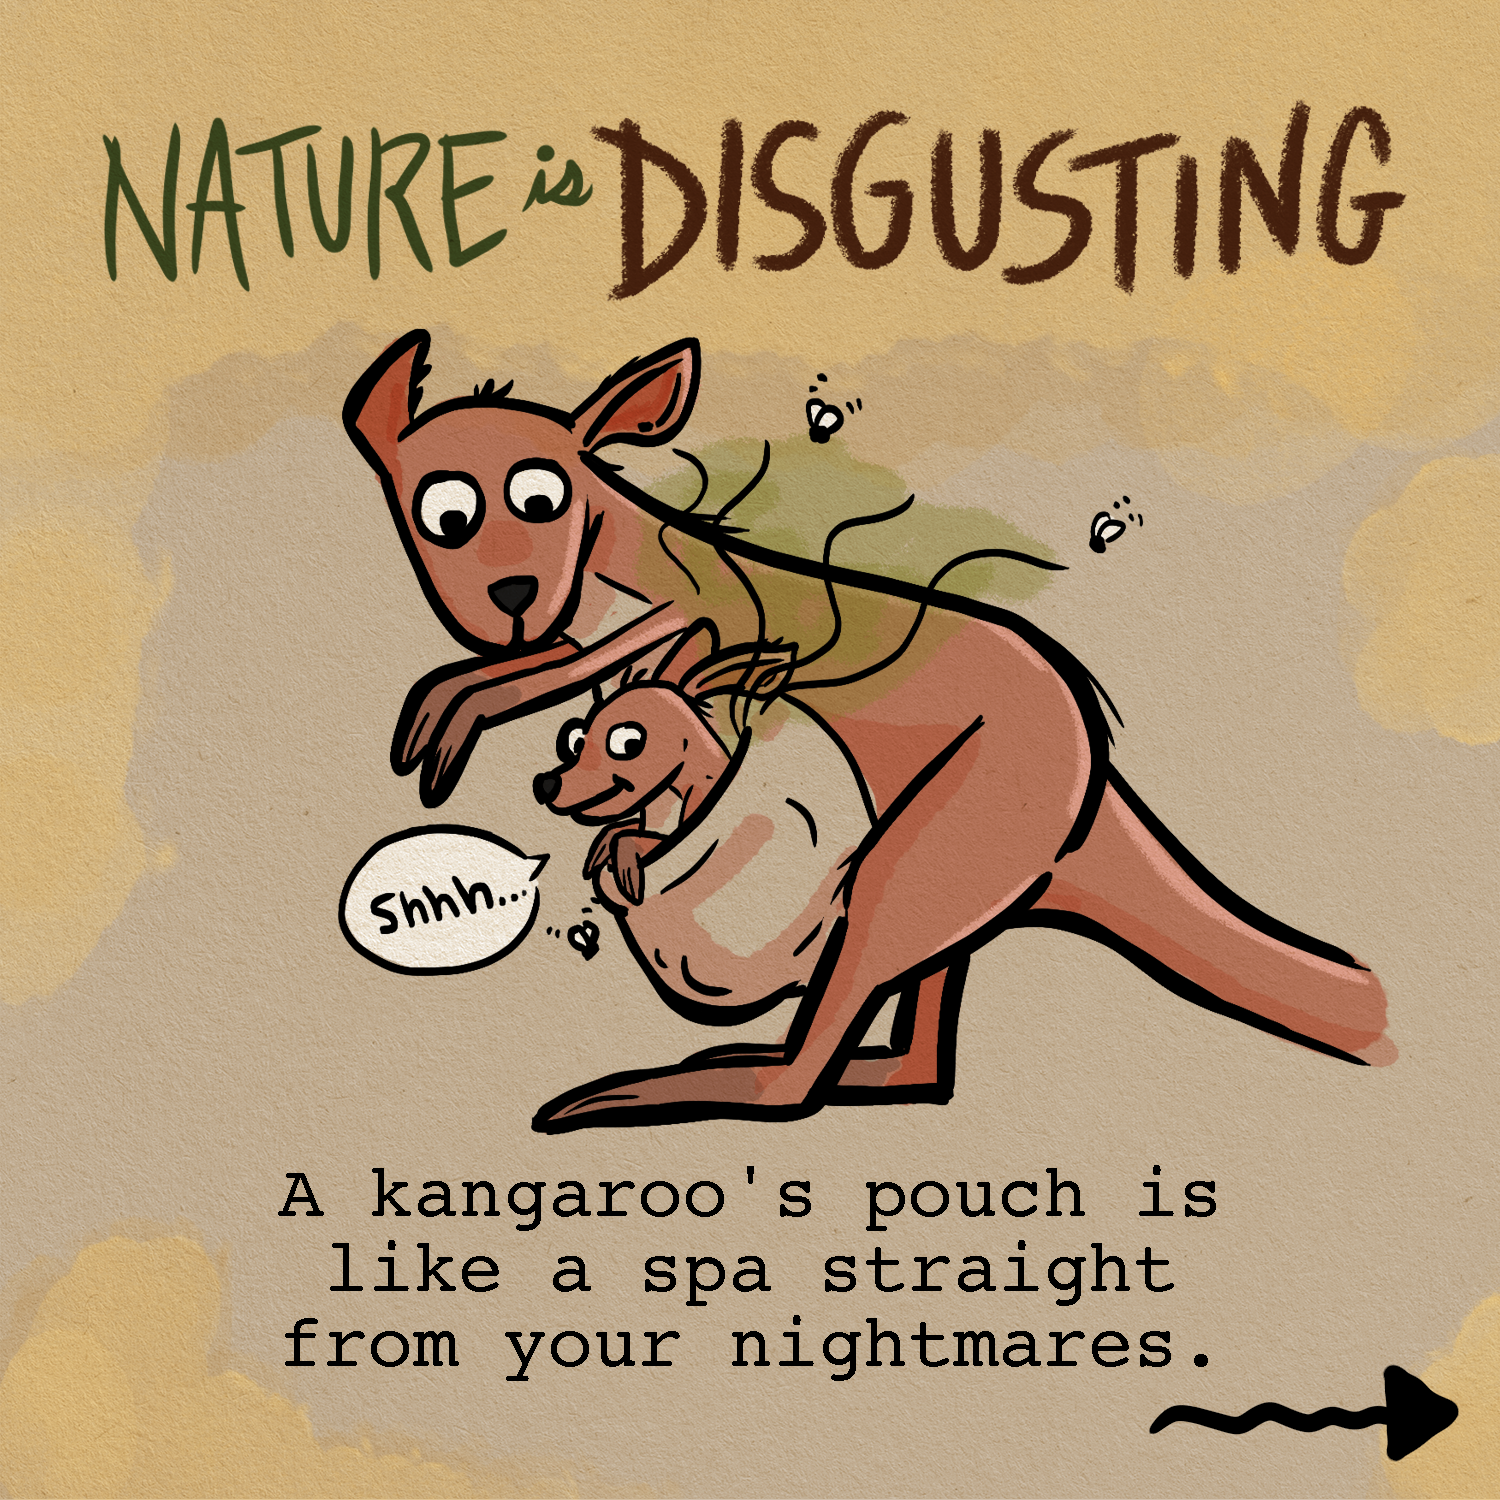 Nature is Disgusting: A kangaroo's pouch is like a spa straight from your nightmares.